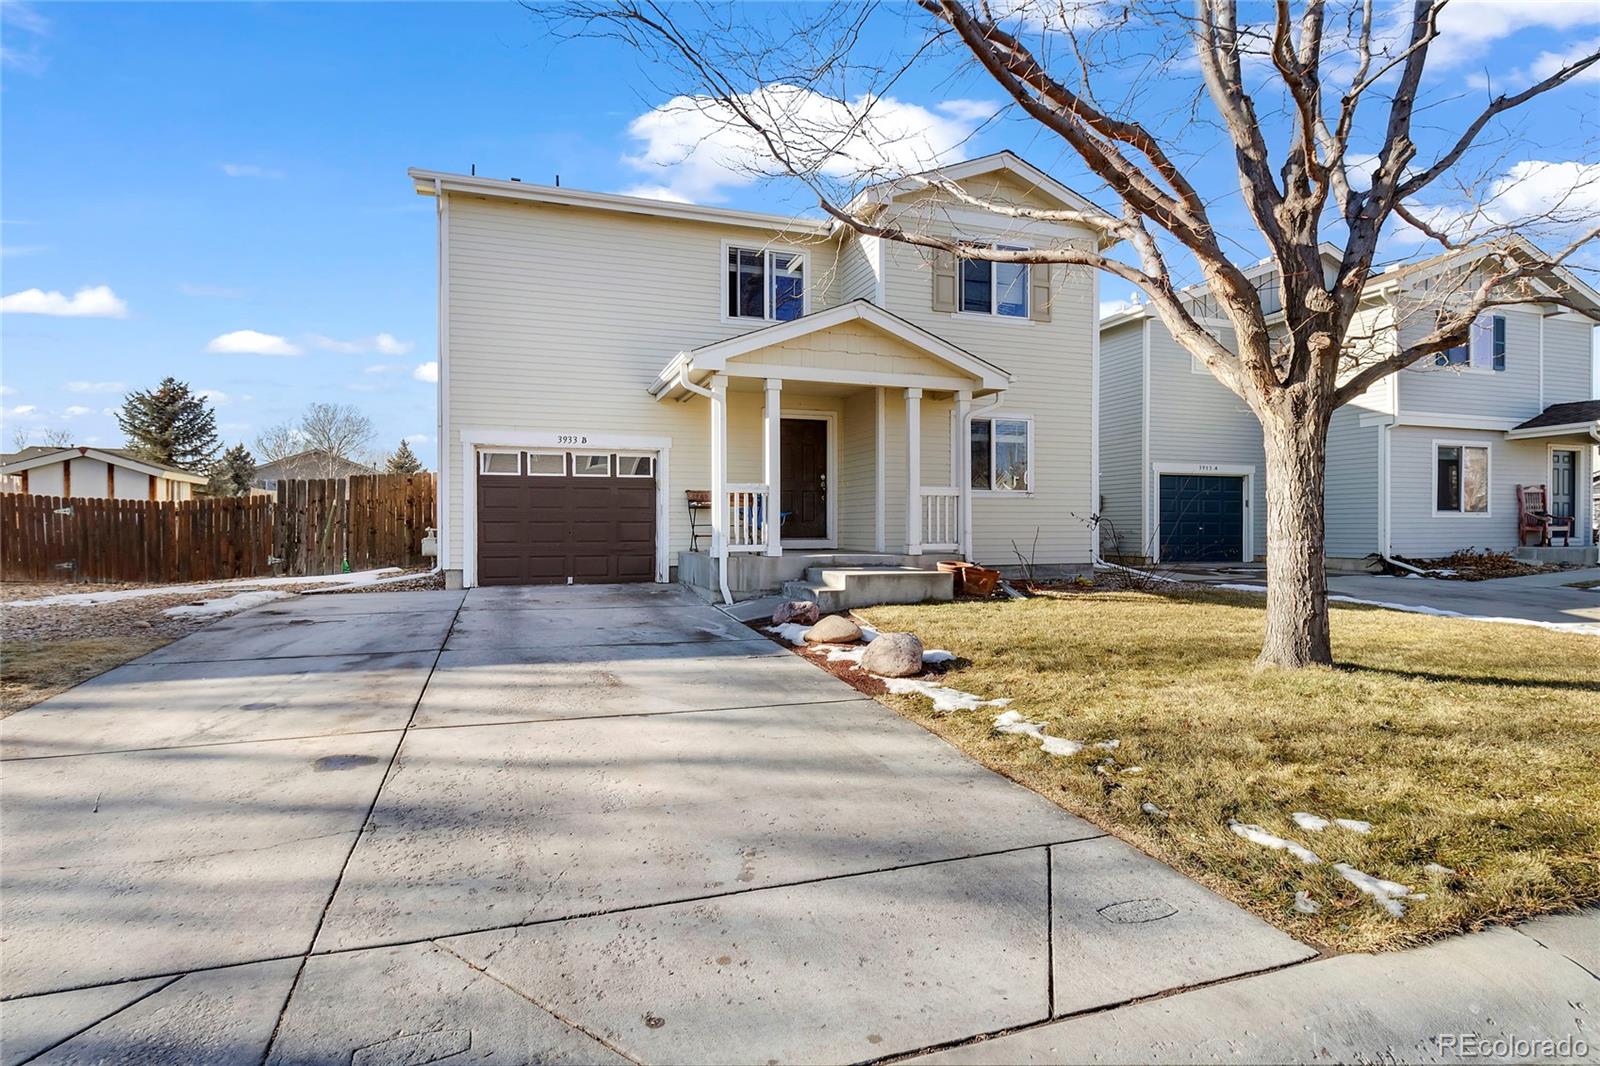 3933  celtic lane , Fort Collins sold home. Closed on 2024-03-19 for $411,500.